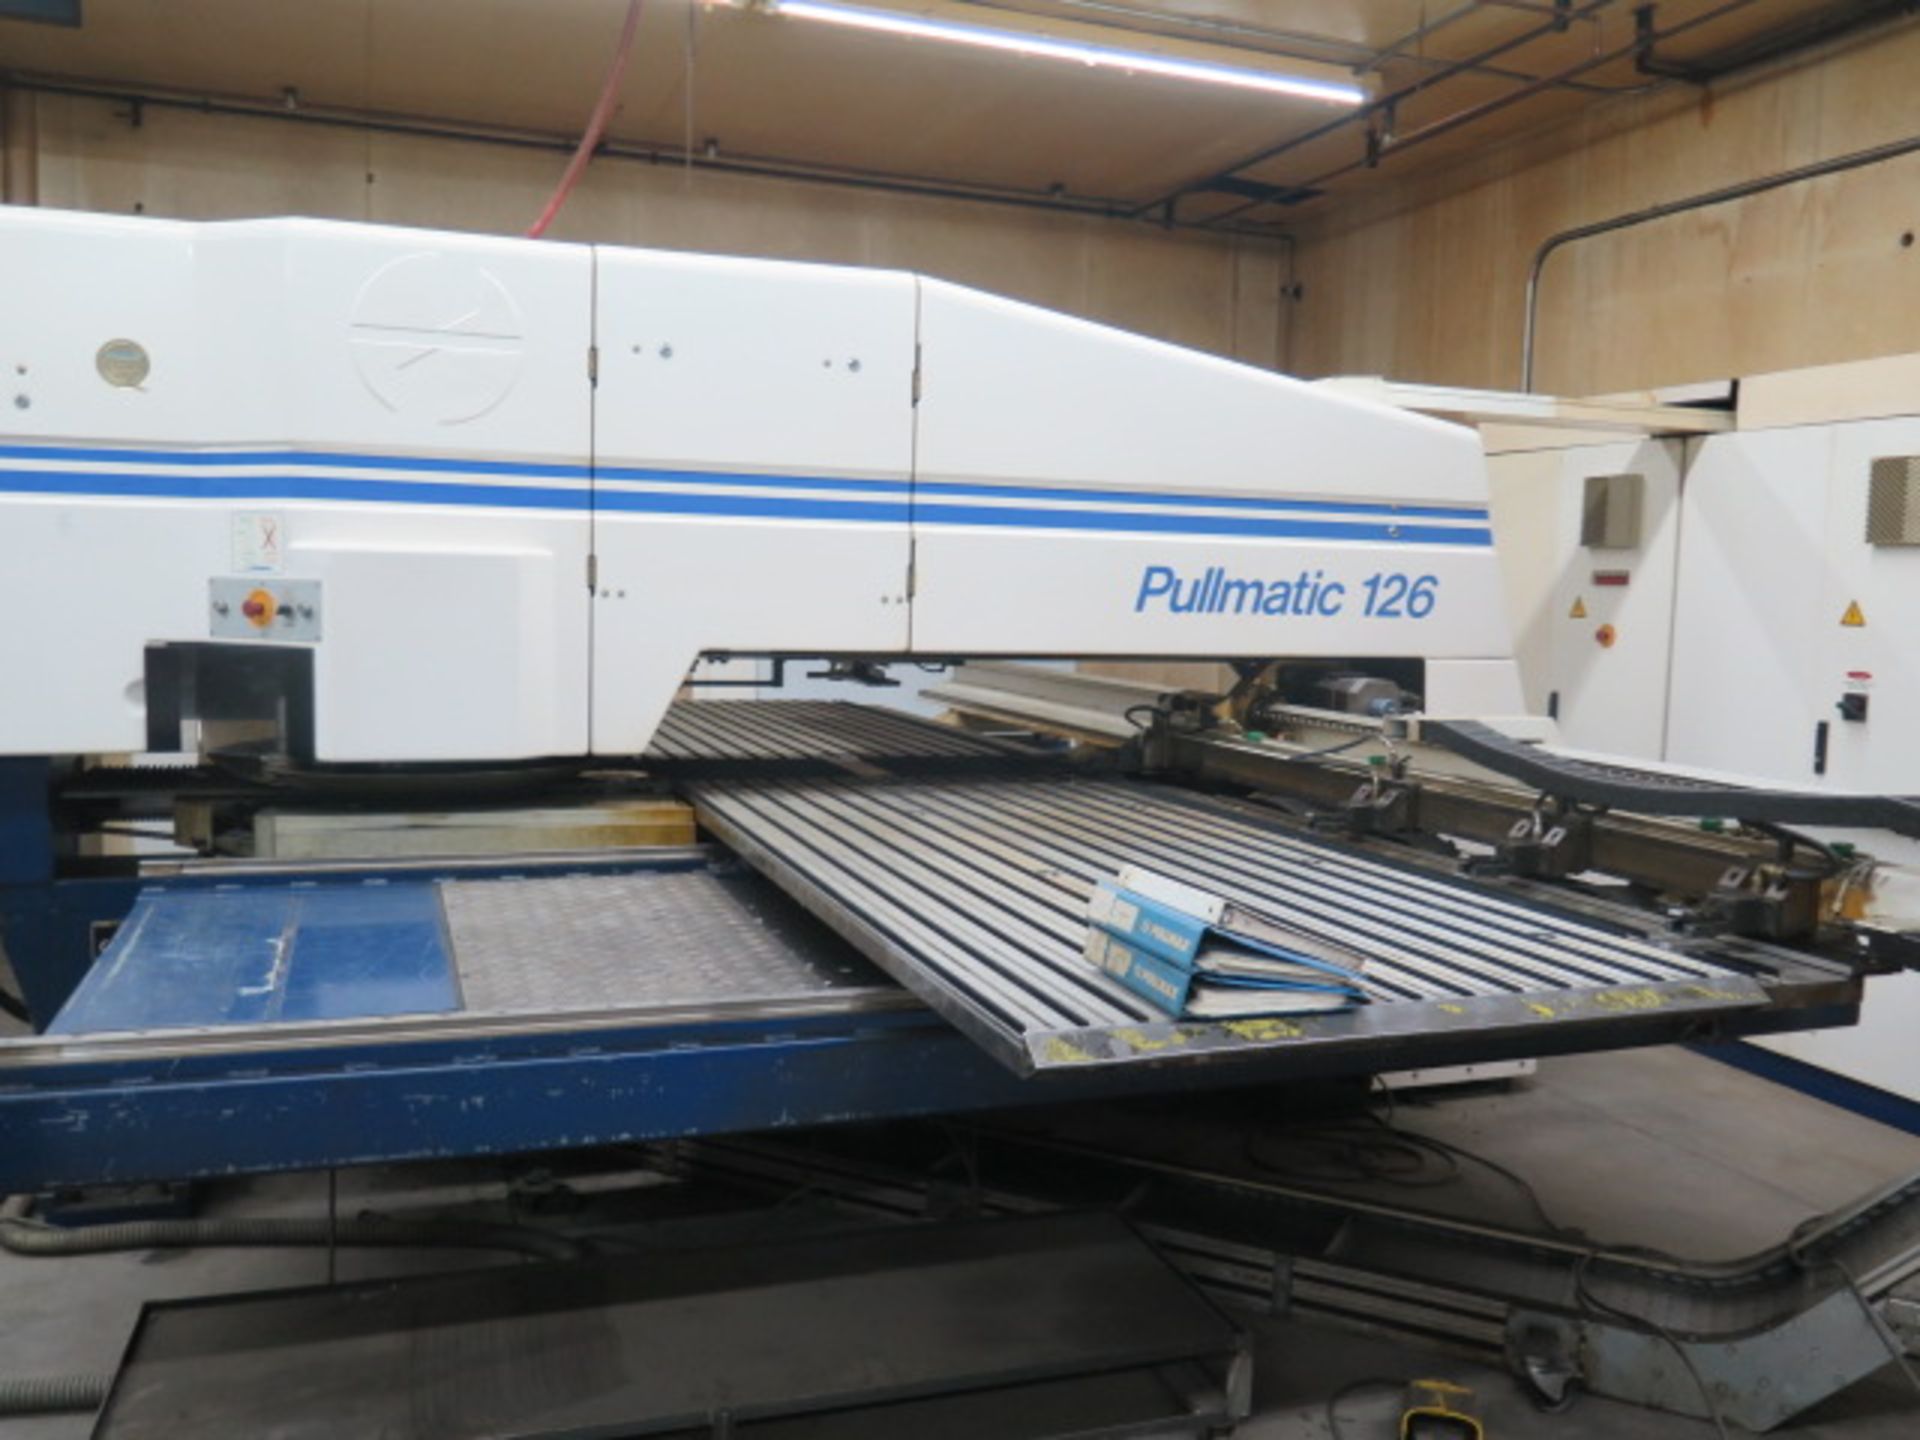 1996 Pullmax Pullmatic 126 33 Ton 15-Station CNC Turret Punch Press s/n 45000027, SOLD AS IS - Image 3 of 16